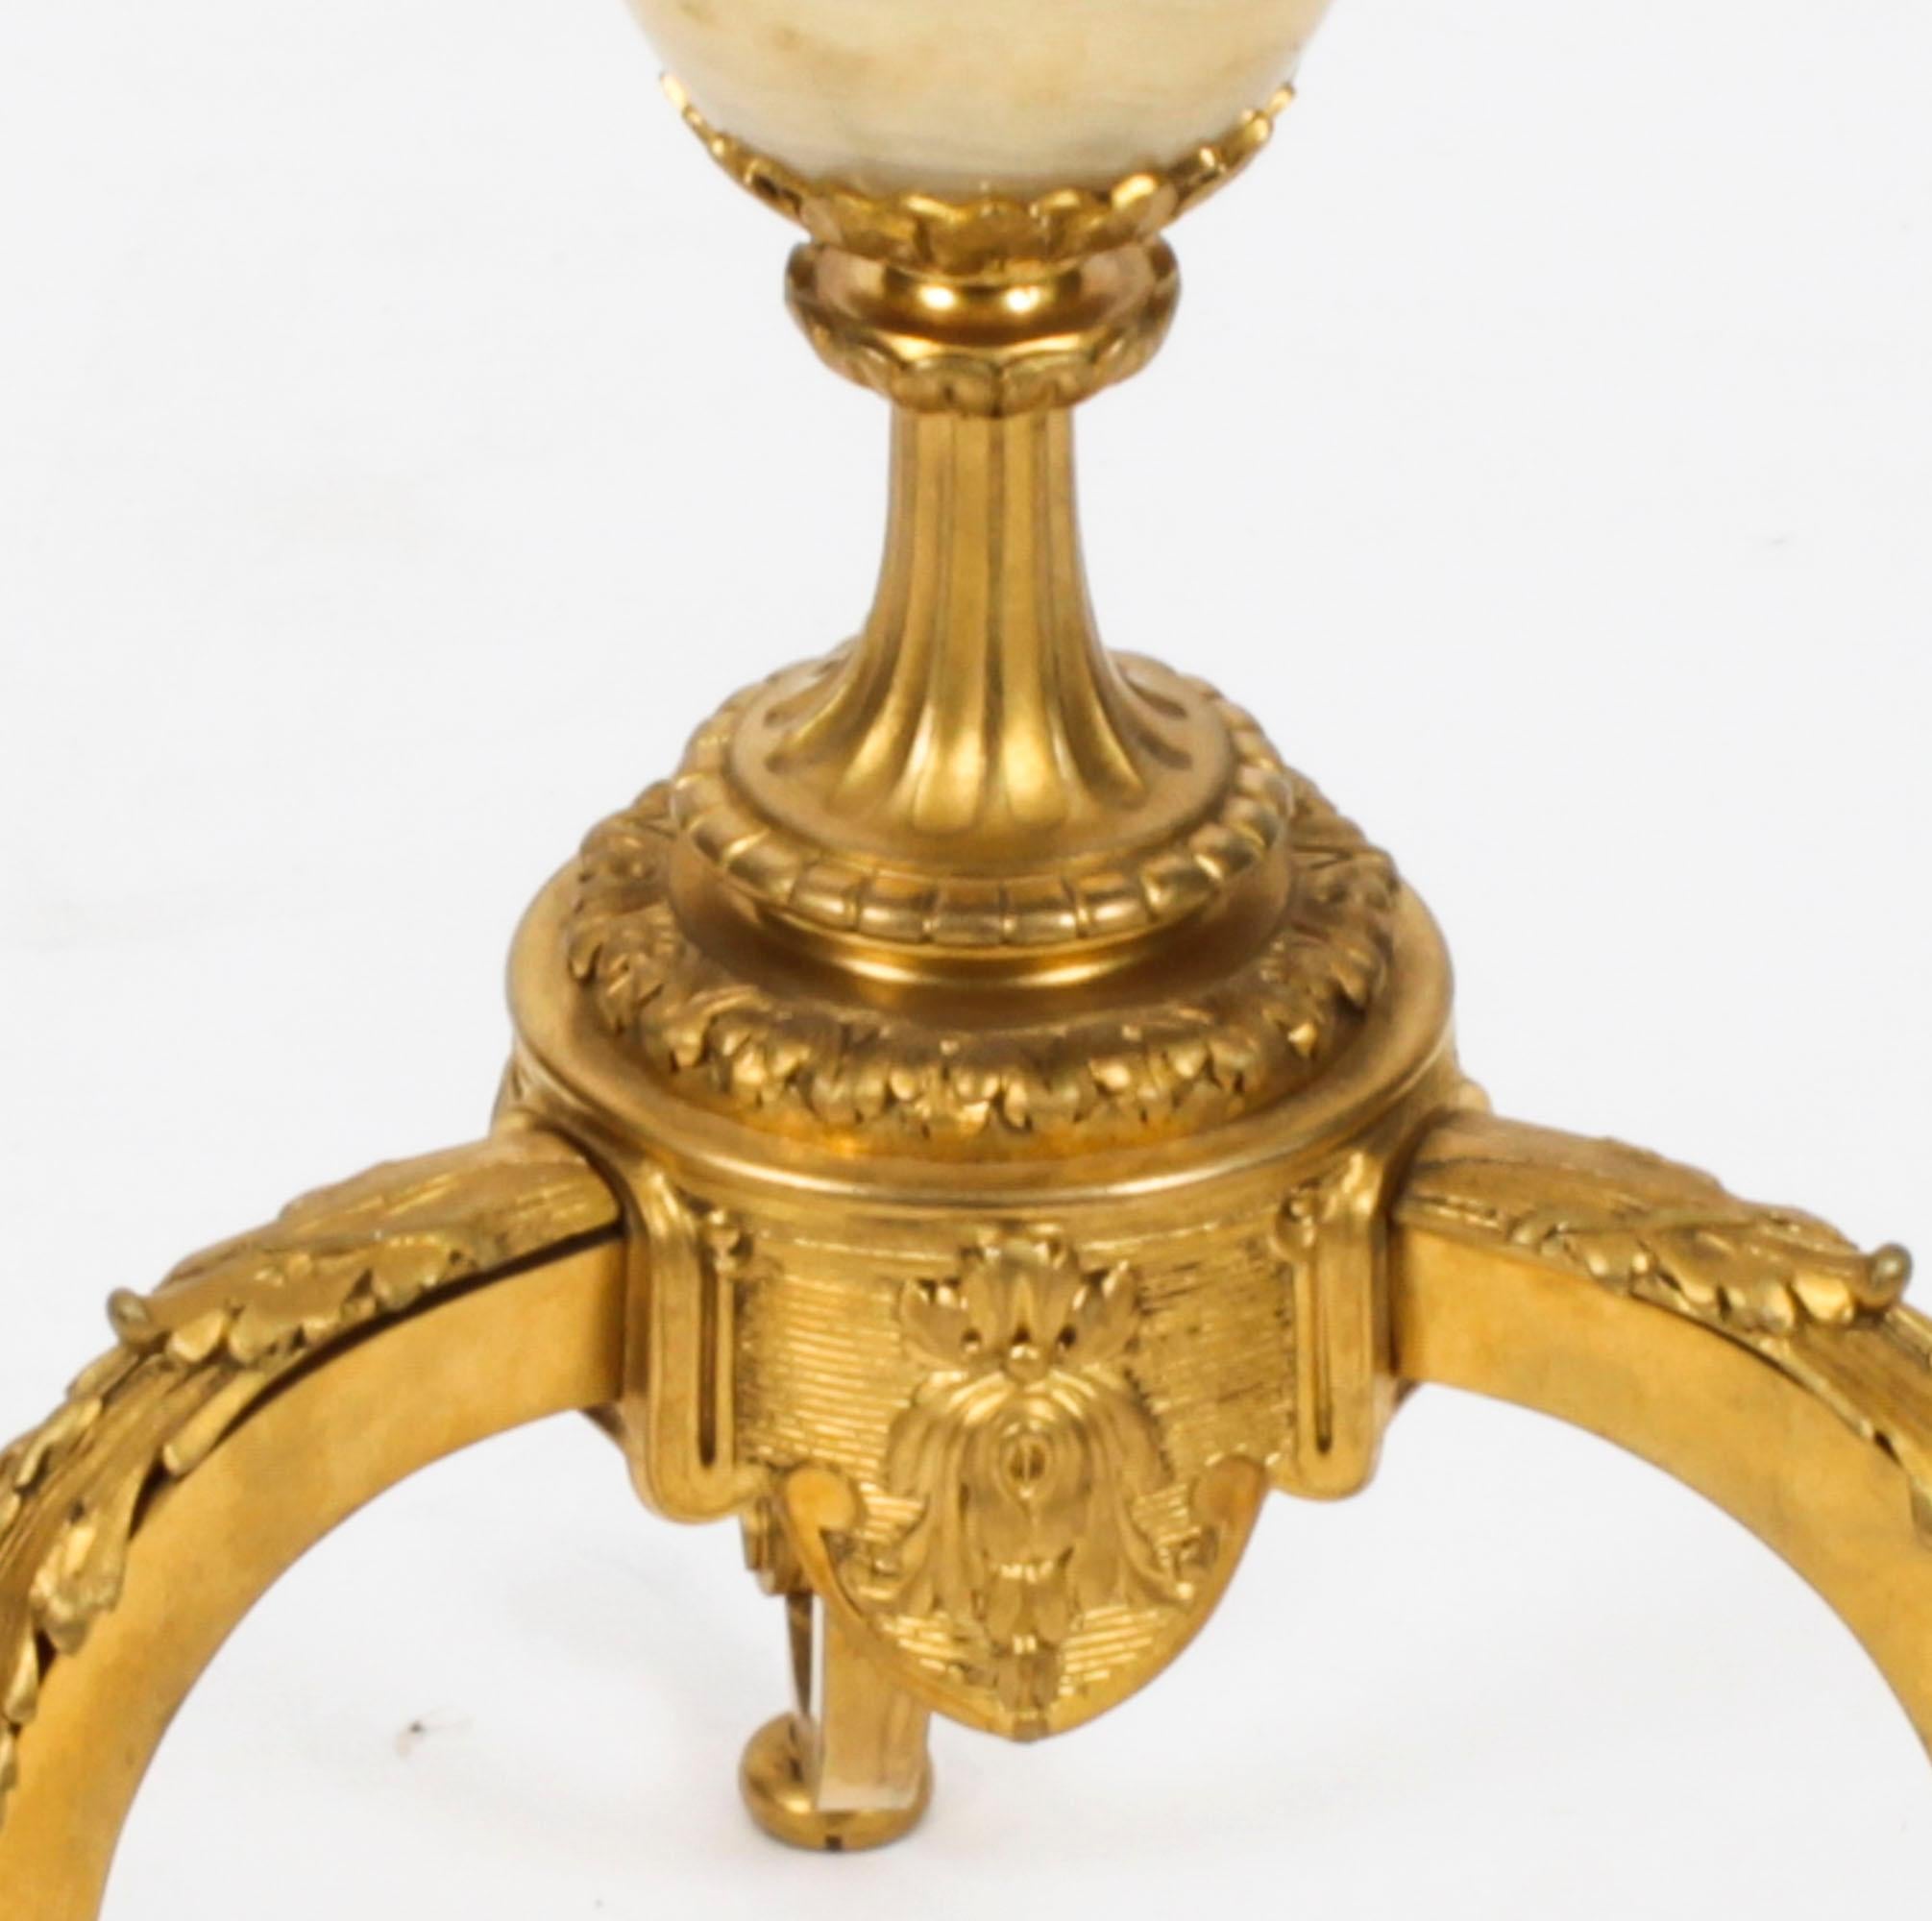 Antique French Ormolu Onyx Topped Occasional Table 19th Century For Sale 7